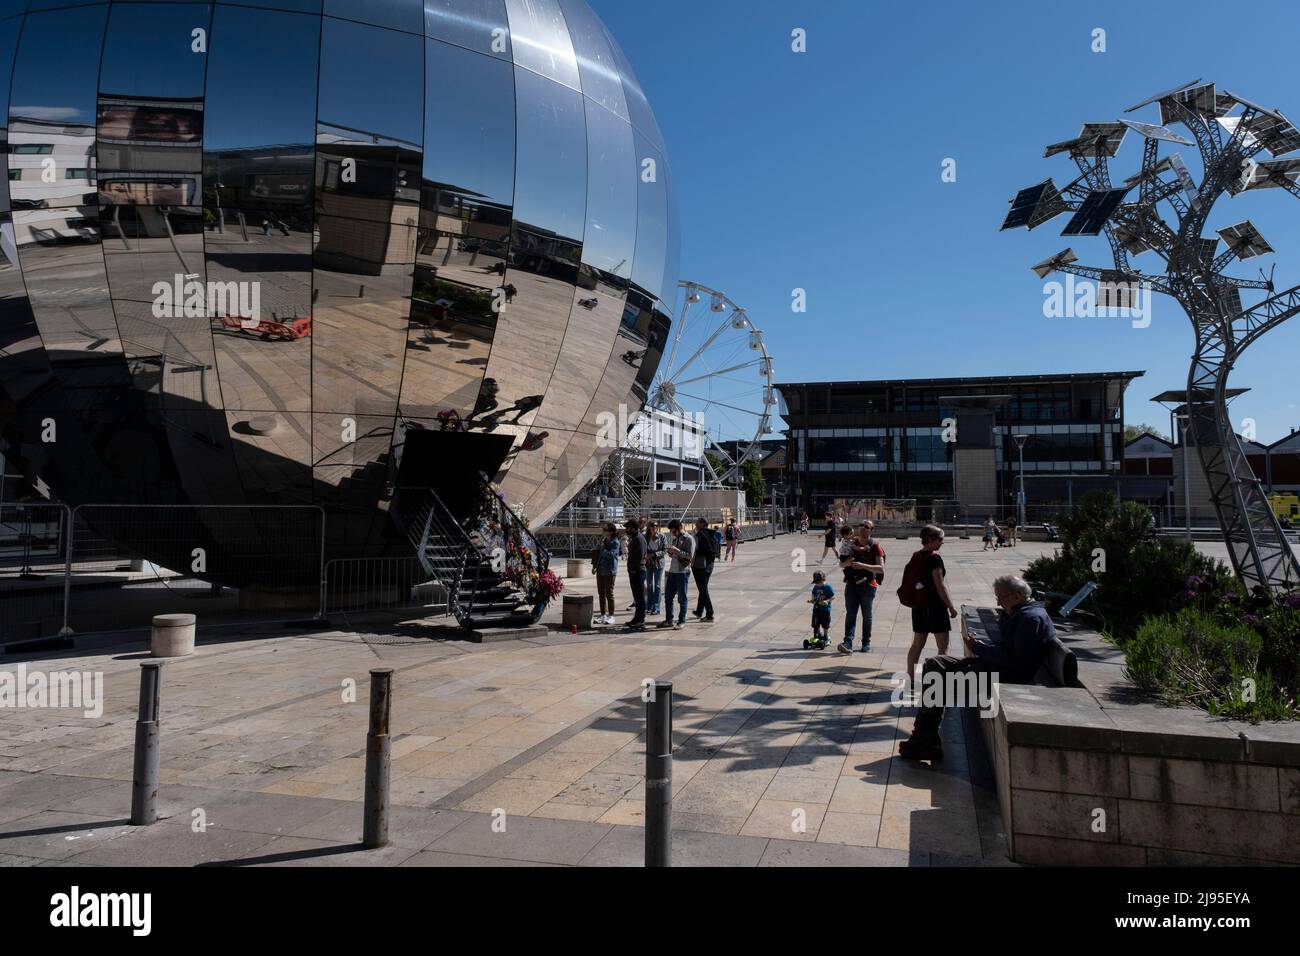 Mirror sphere in Millennuim Square which was built as part of the At Bristol development, and has become a popular public area on 7th May 2022 in Bristol, United Kingdom. Stock Photo